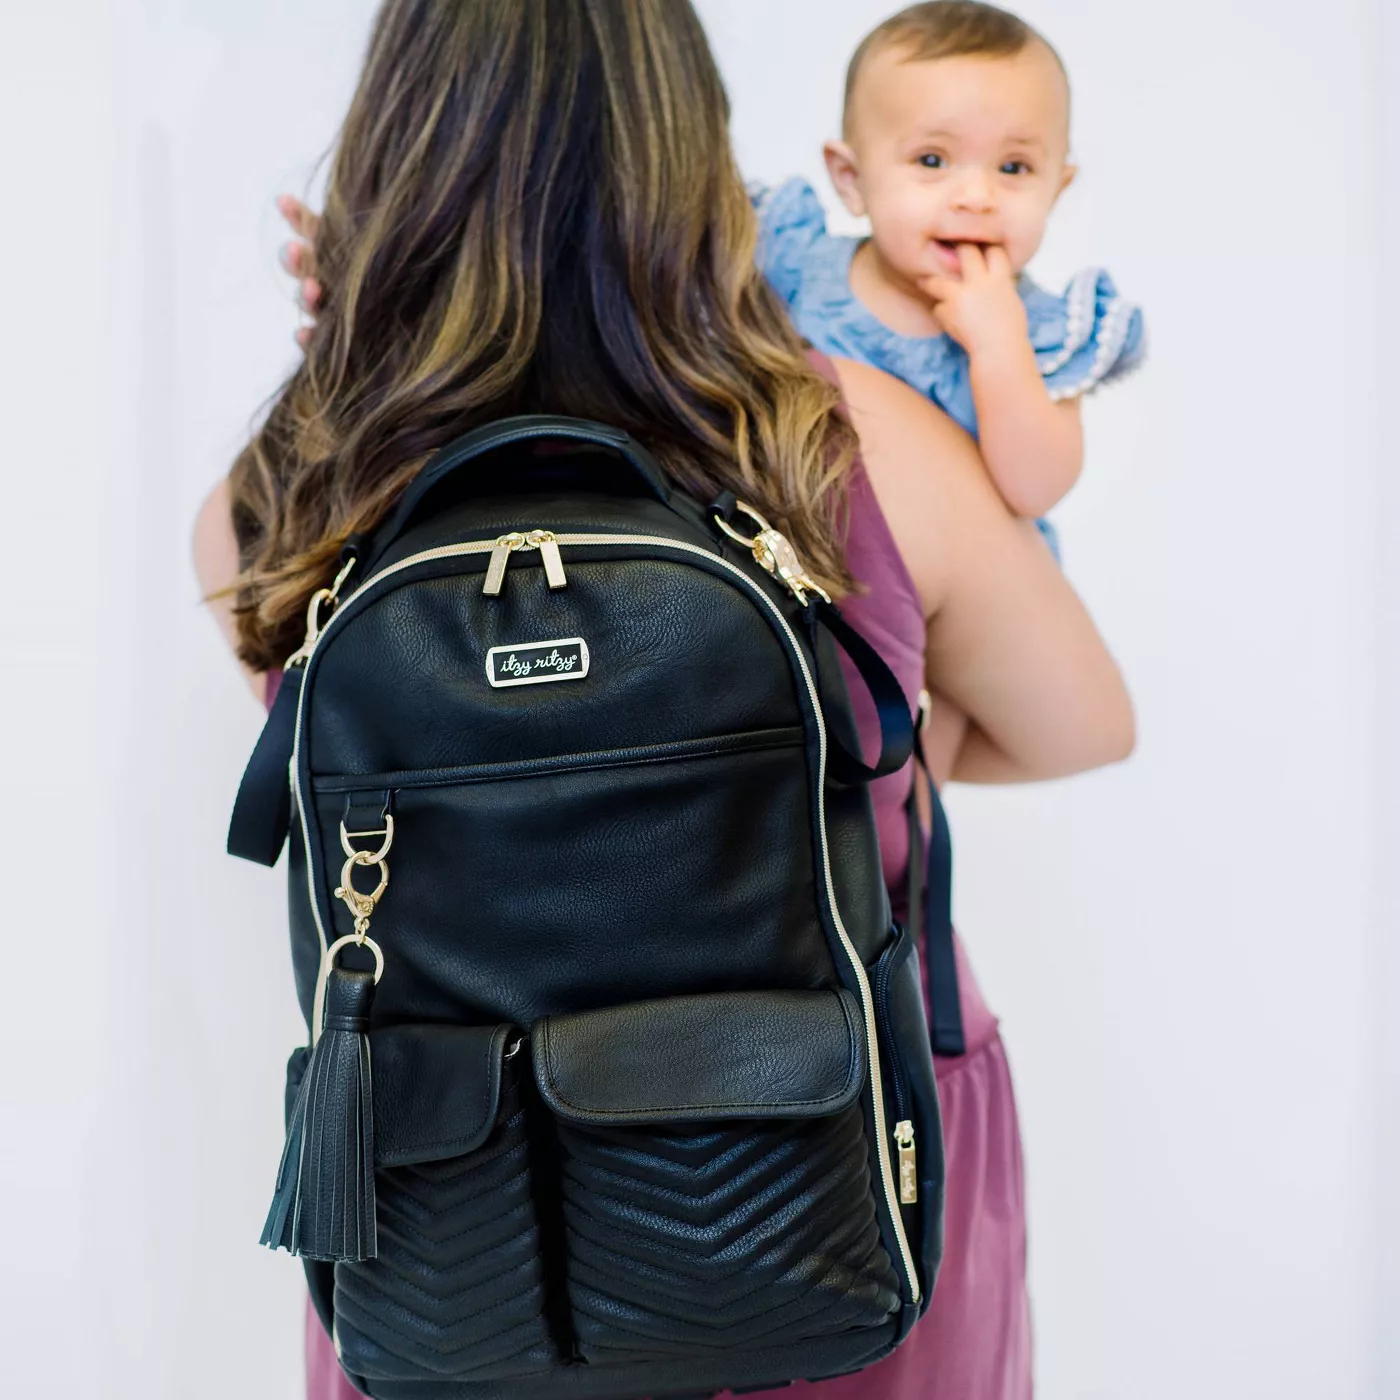 Itzy Ritzy Boss Backpack Diaper Bag - image 7 of 11